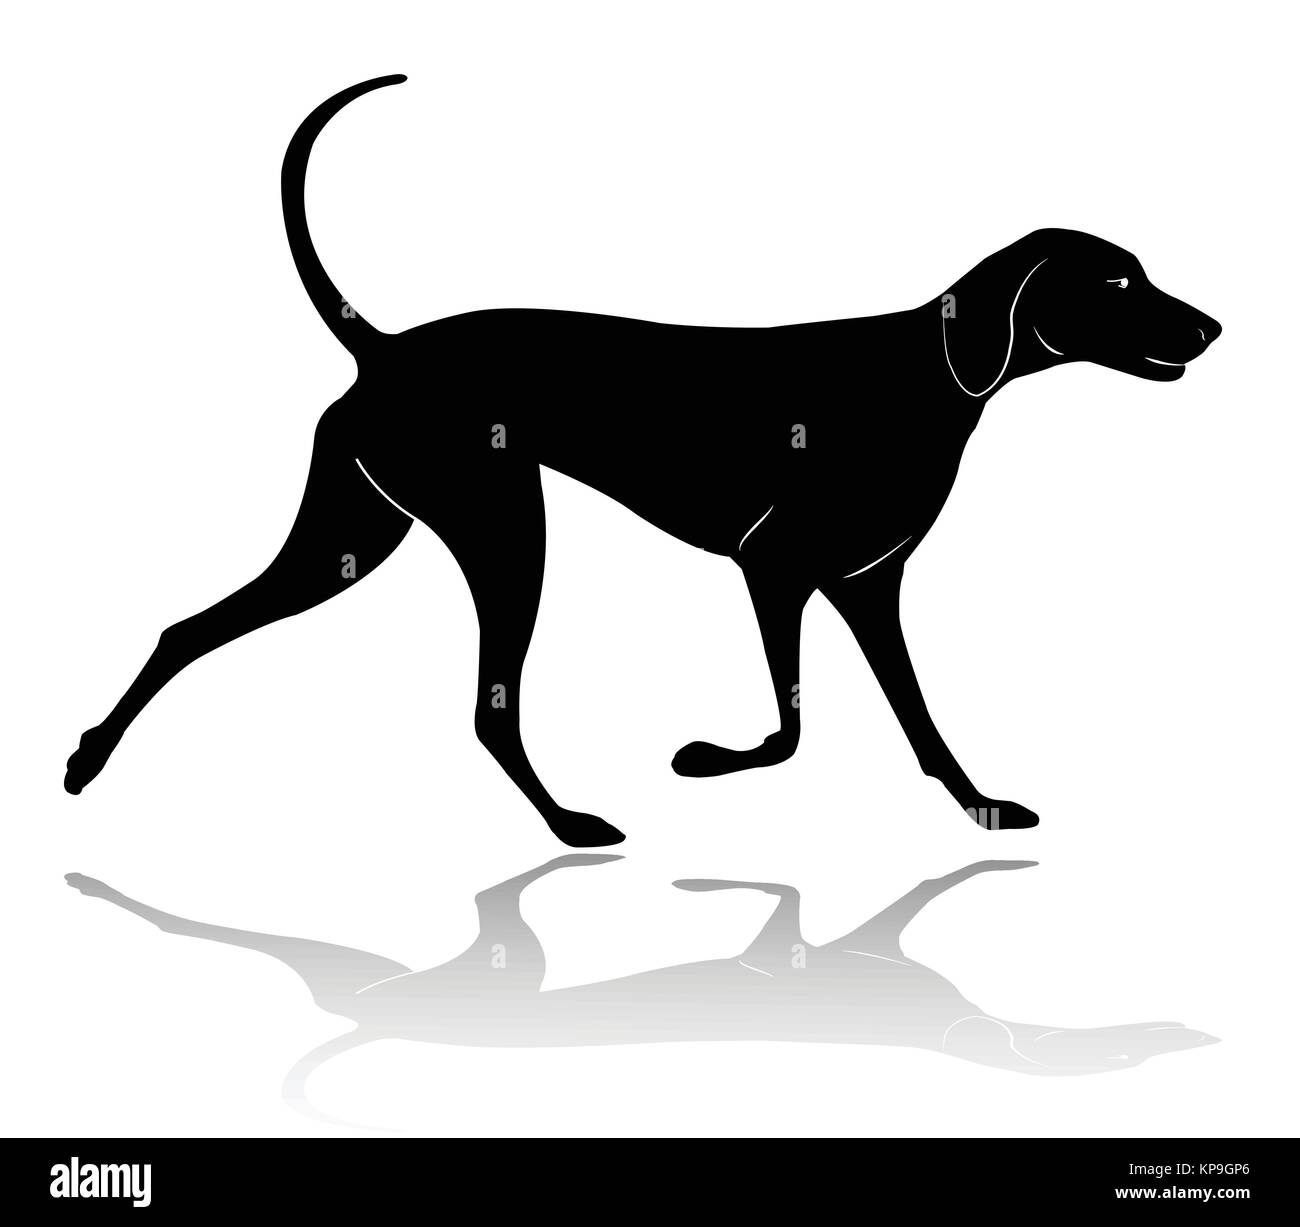 hunting dog walking silhouette - vector Stock Vector